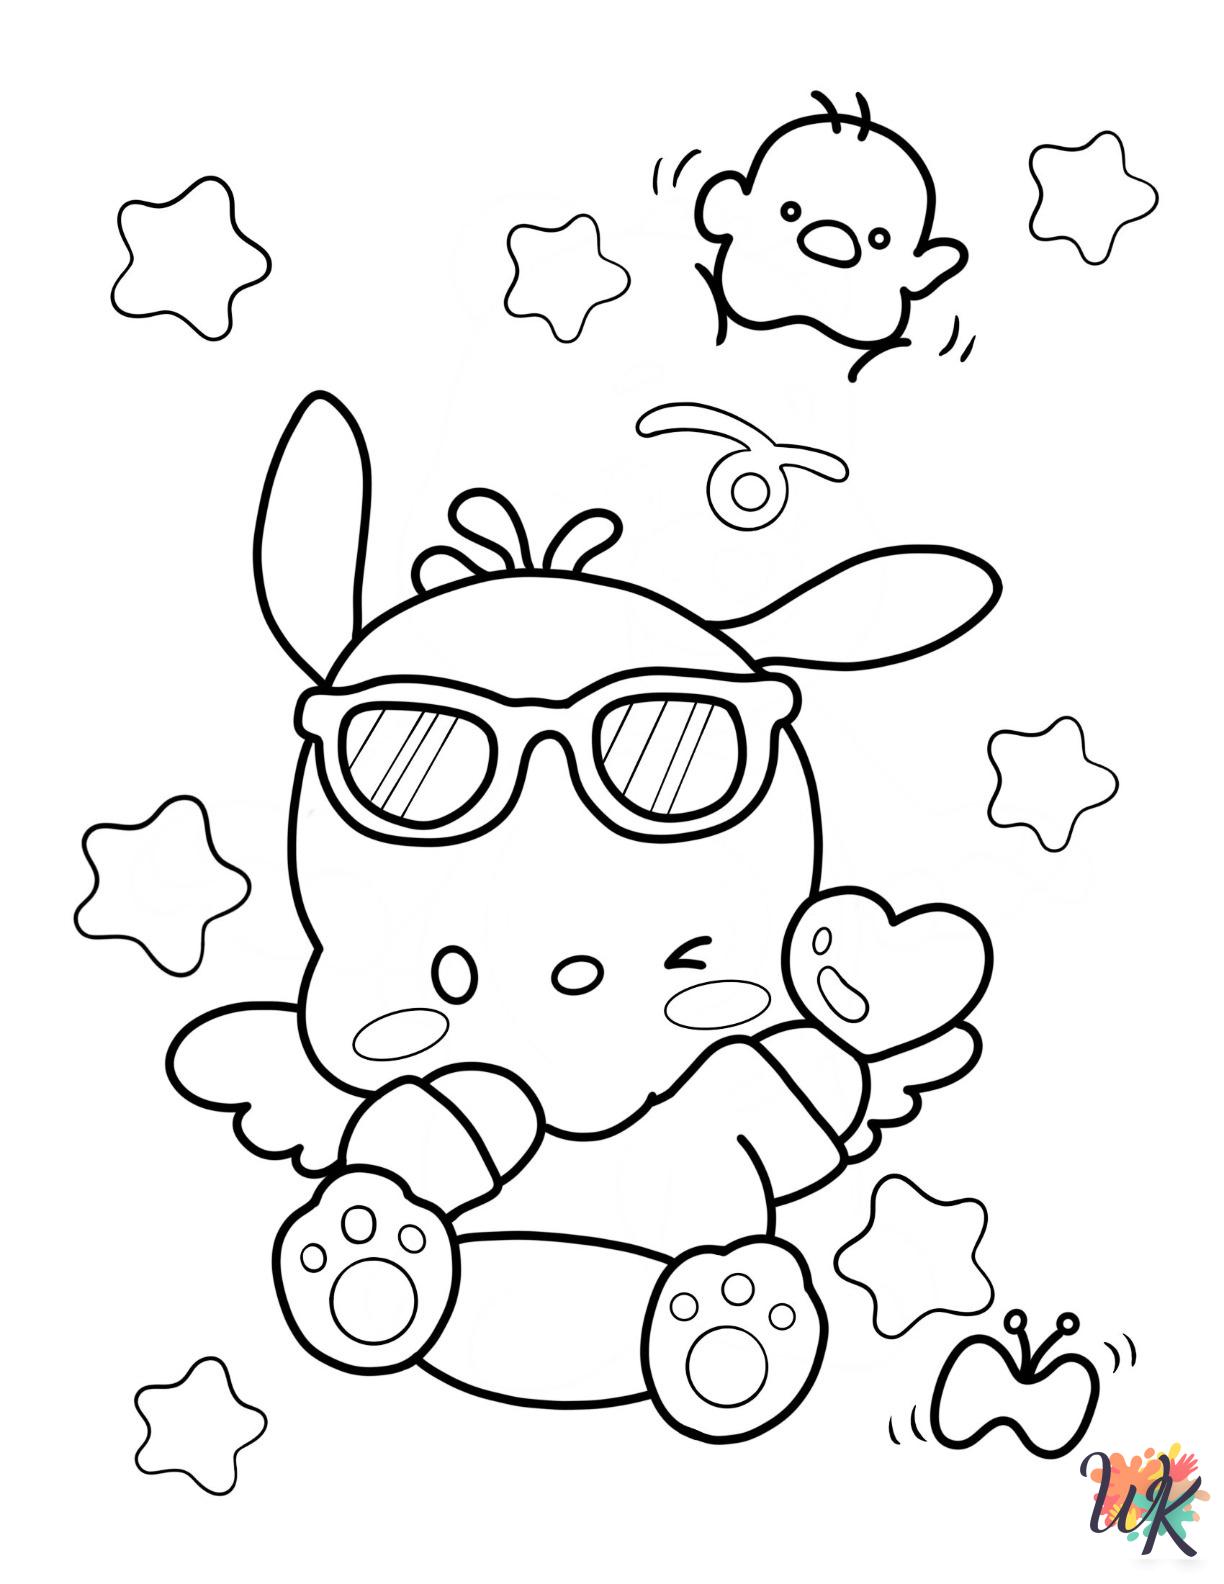 Pochacco coloring pages pdf